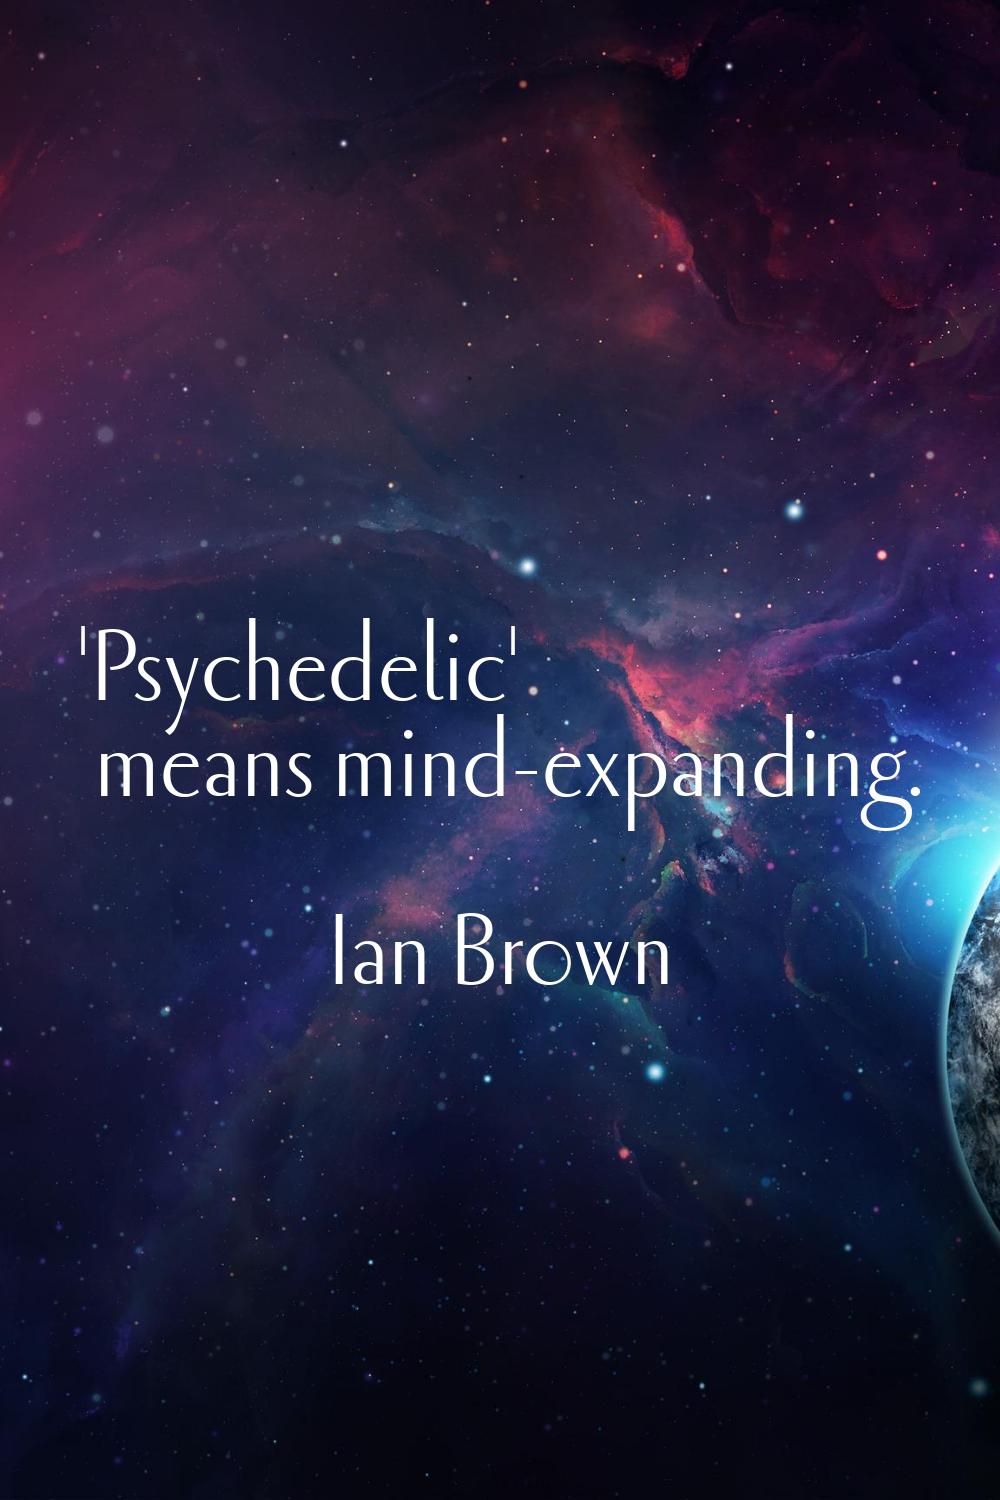 'Psychedelic' means mind-expanding.